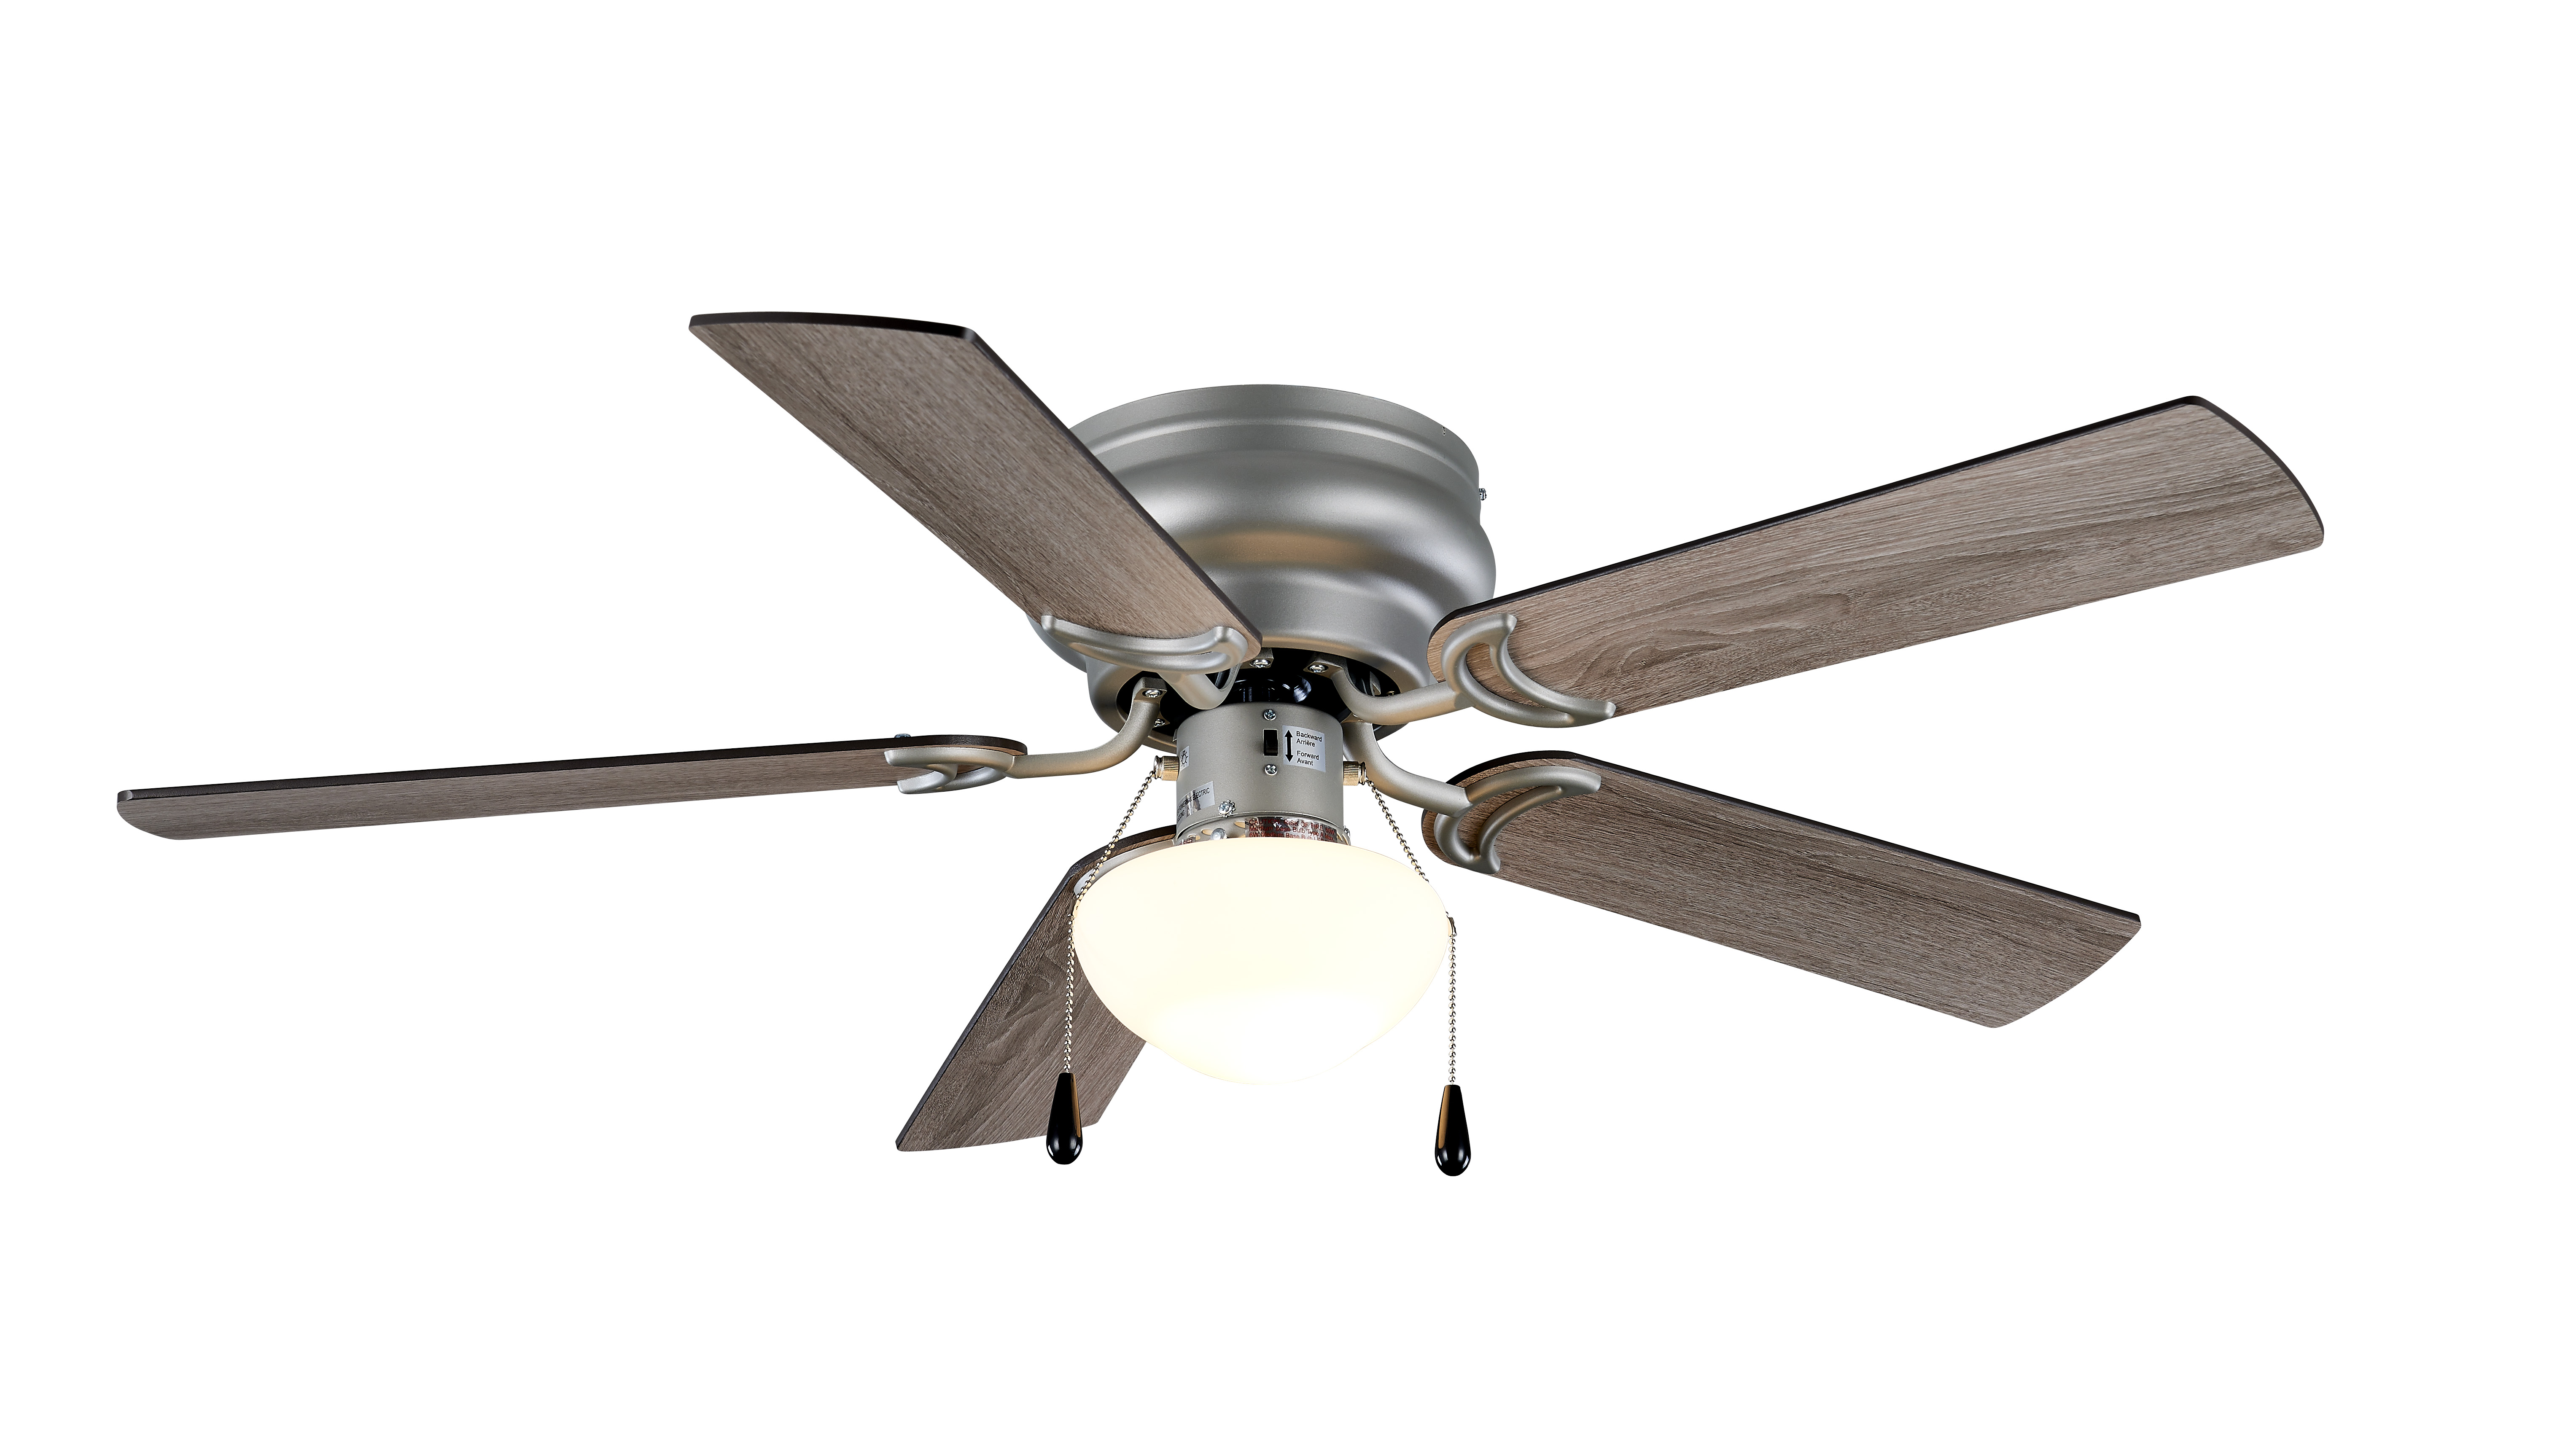 Mainstays 44" Hugger Indoor Ceiling Fan with Single Light, Satin Nickel, 5 Blades, LED, Reverse Airflow - image 2 of 8